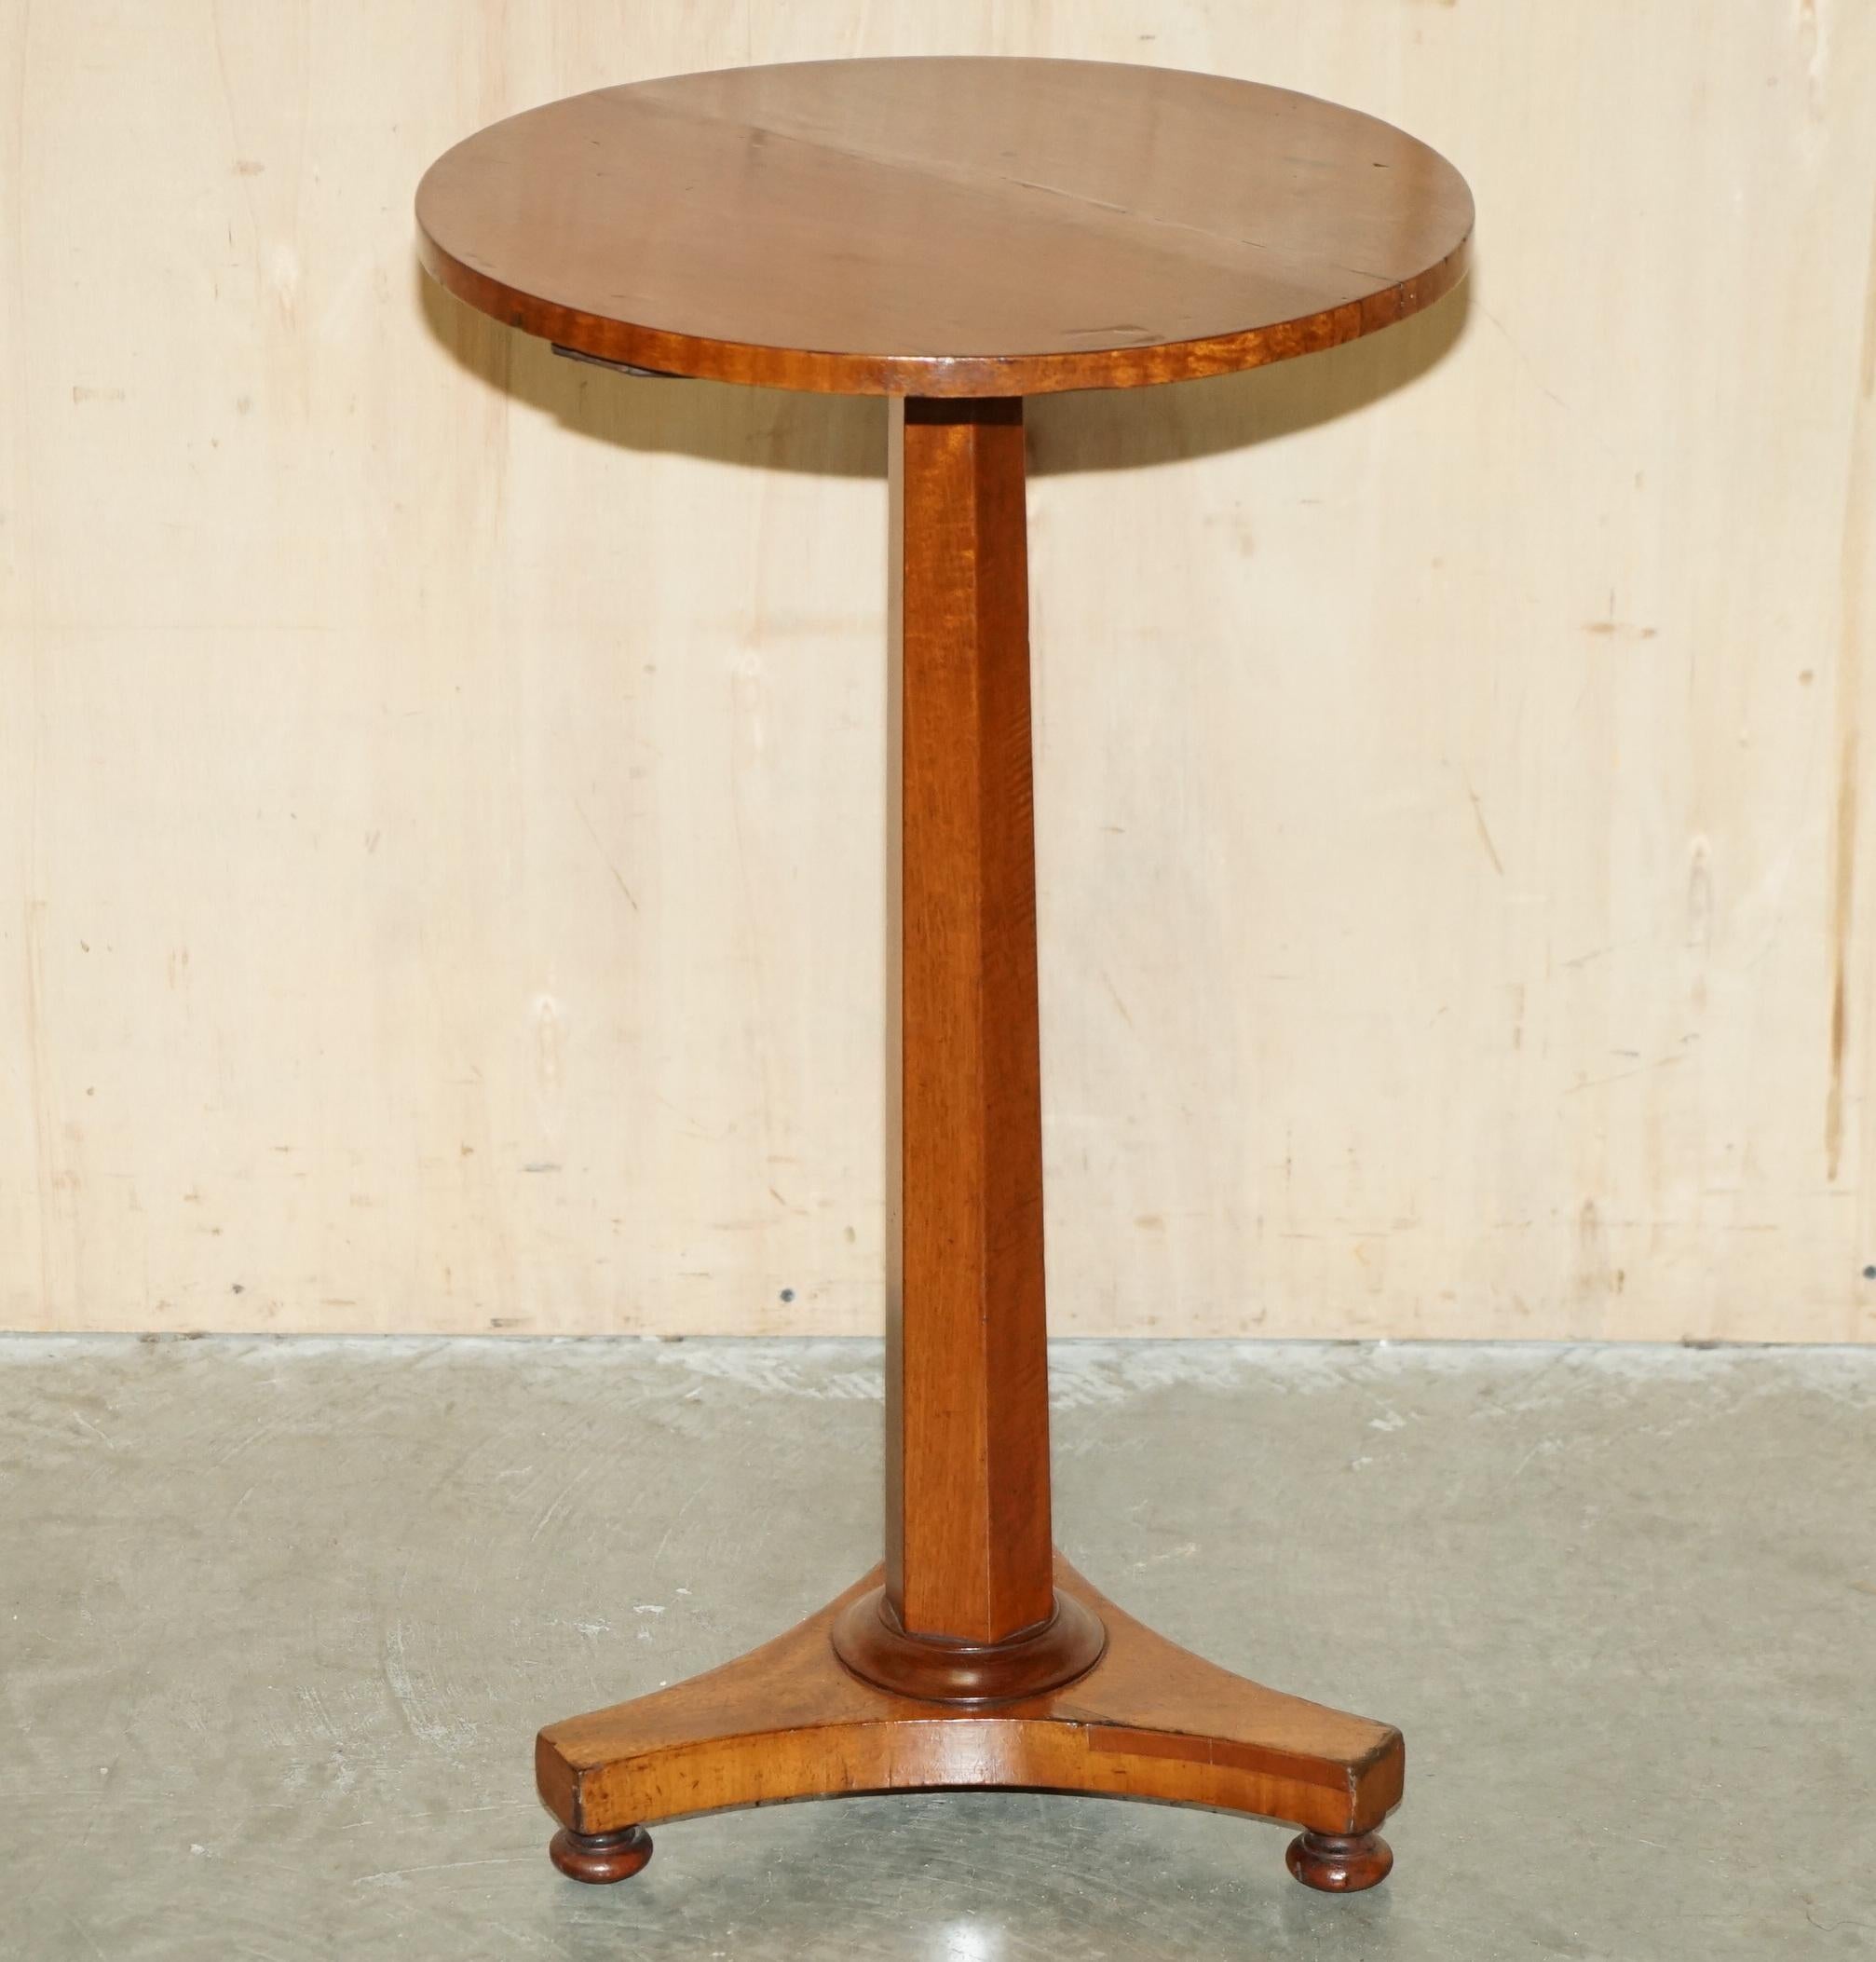 Royal House Antiques

Royal House Antiques is delighted to offer for sale this exquisitely crafted, Fully Restored, Antique circa 1830 William IV Walnut side occasional table

Please note the delivery fee listed is just a guide, it covers within the